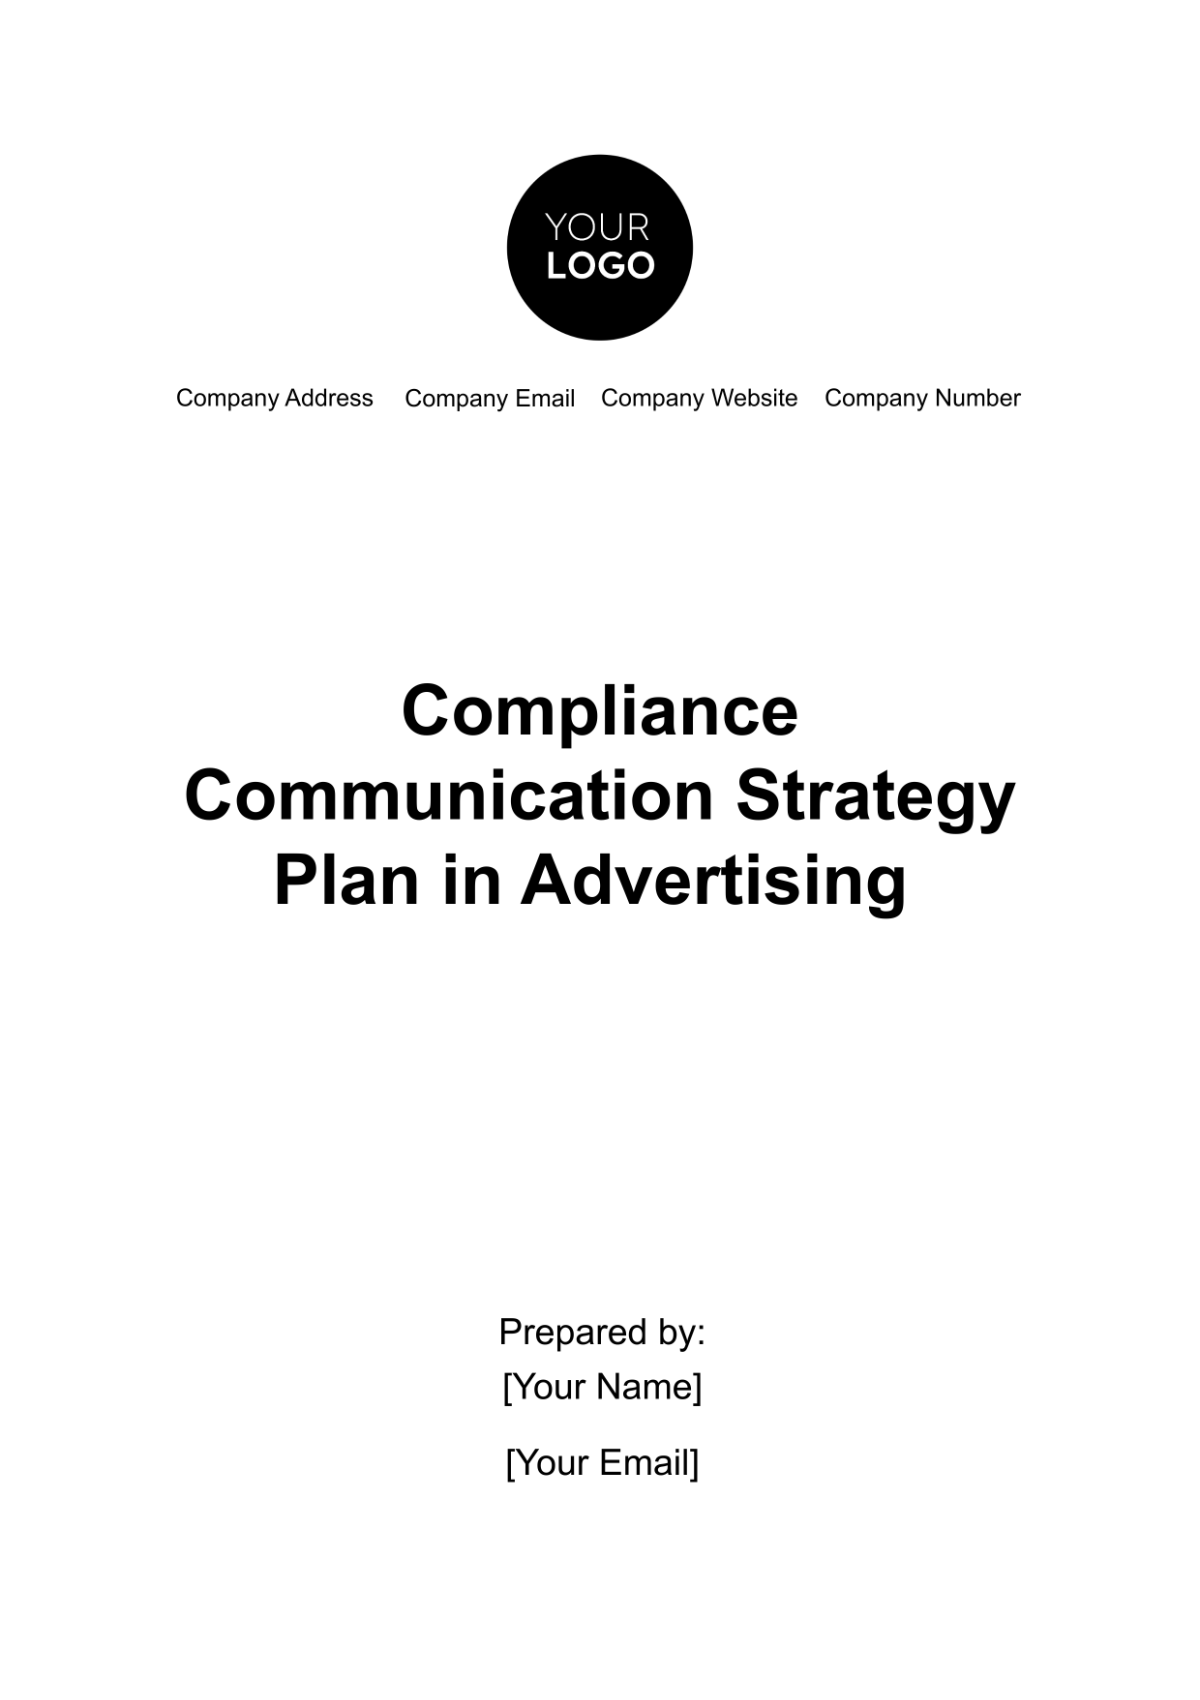 Free Compliance Communication Strategy Plan in Advertising Template